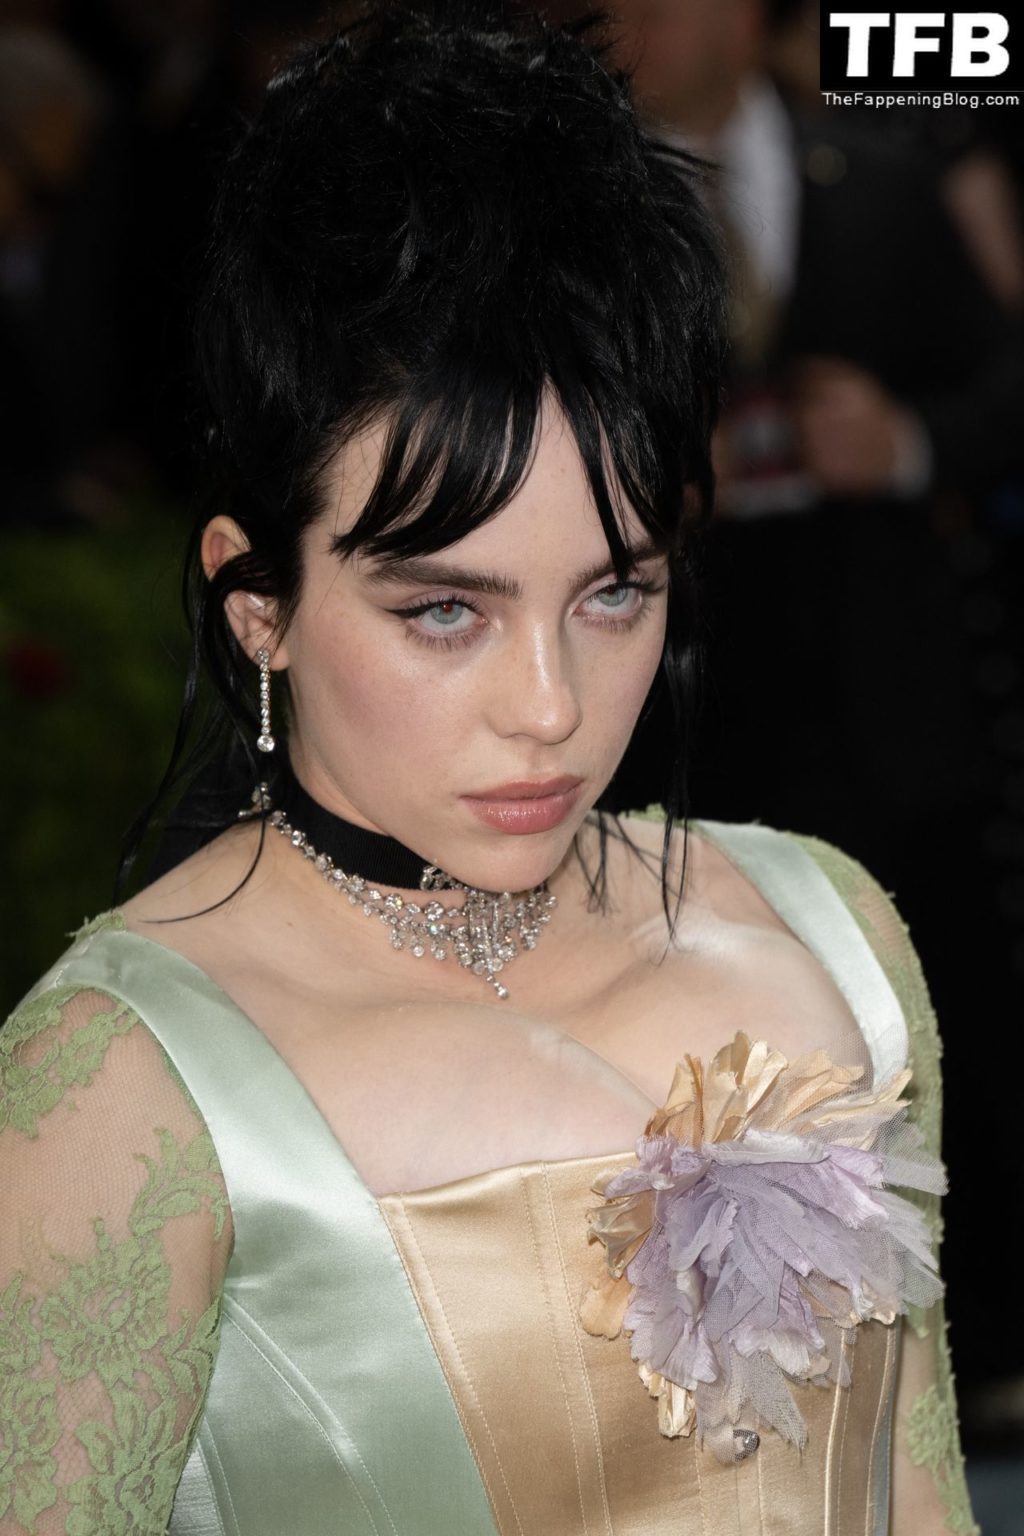 Billie Eilish Sexy The Fappening Blog 32 1024x1536 - Billie Eilish Showcases Nice Cleavage at The 2022 Met Gala in NYC (155 Photos)